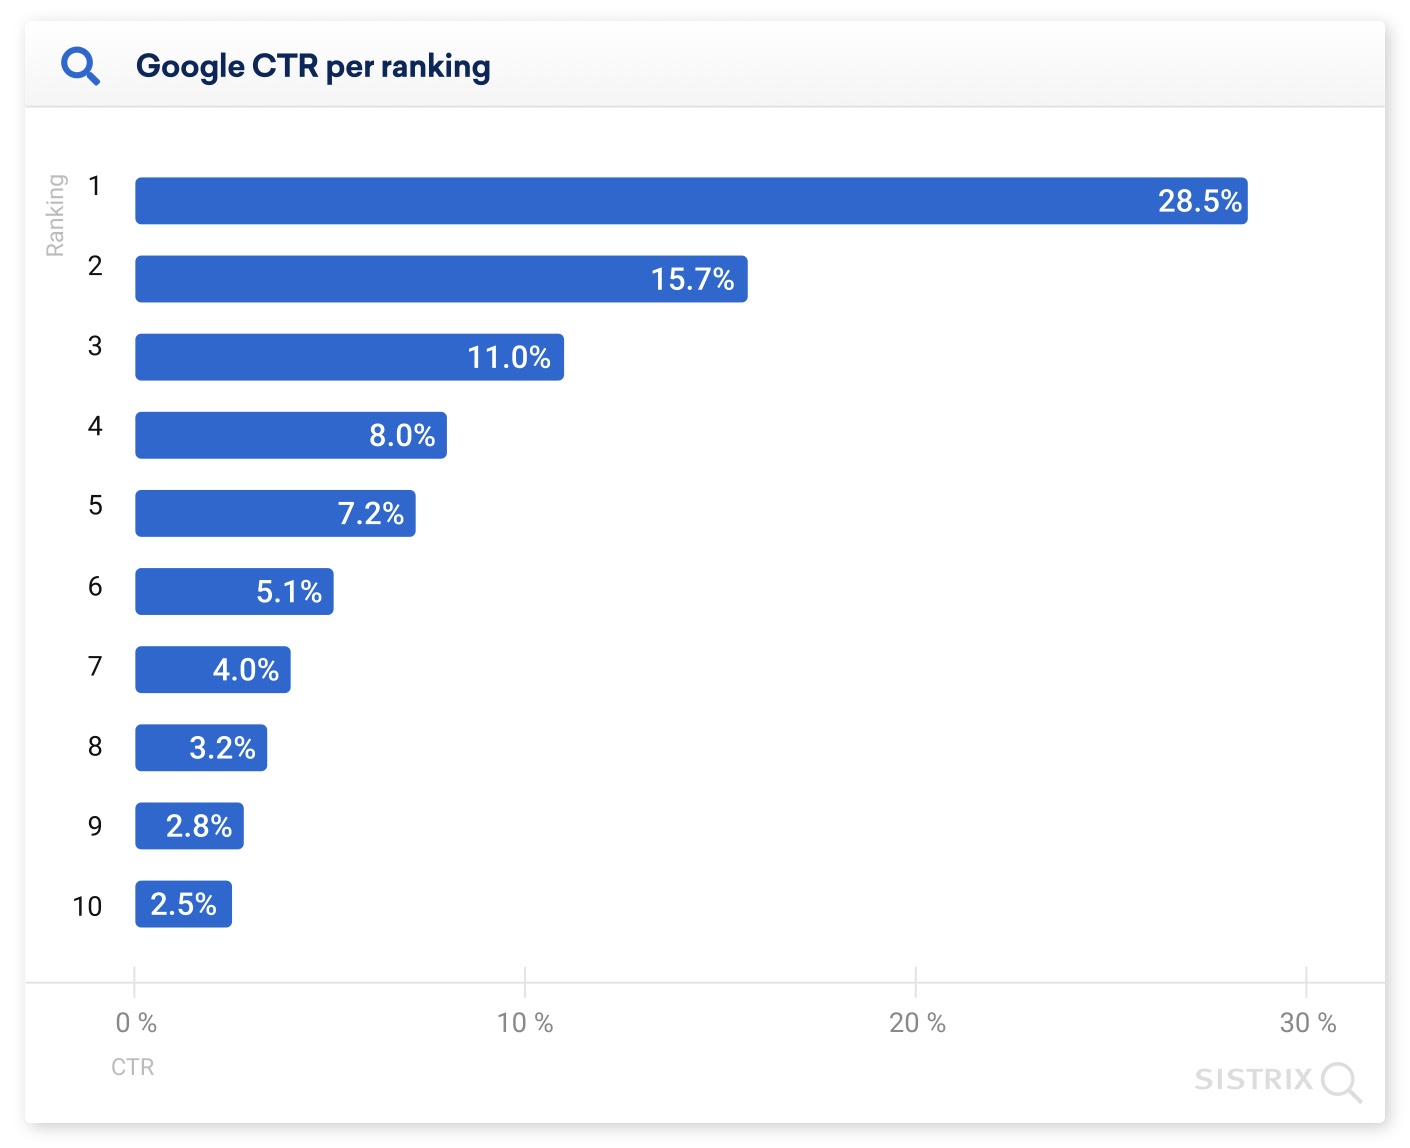 Google CTR per ranking from top 1 to top 10.